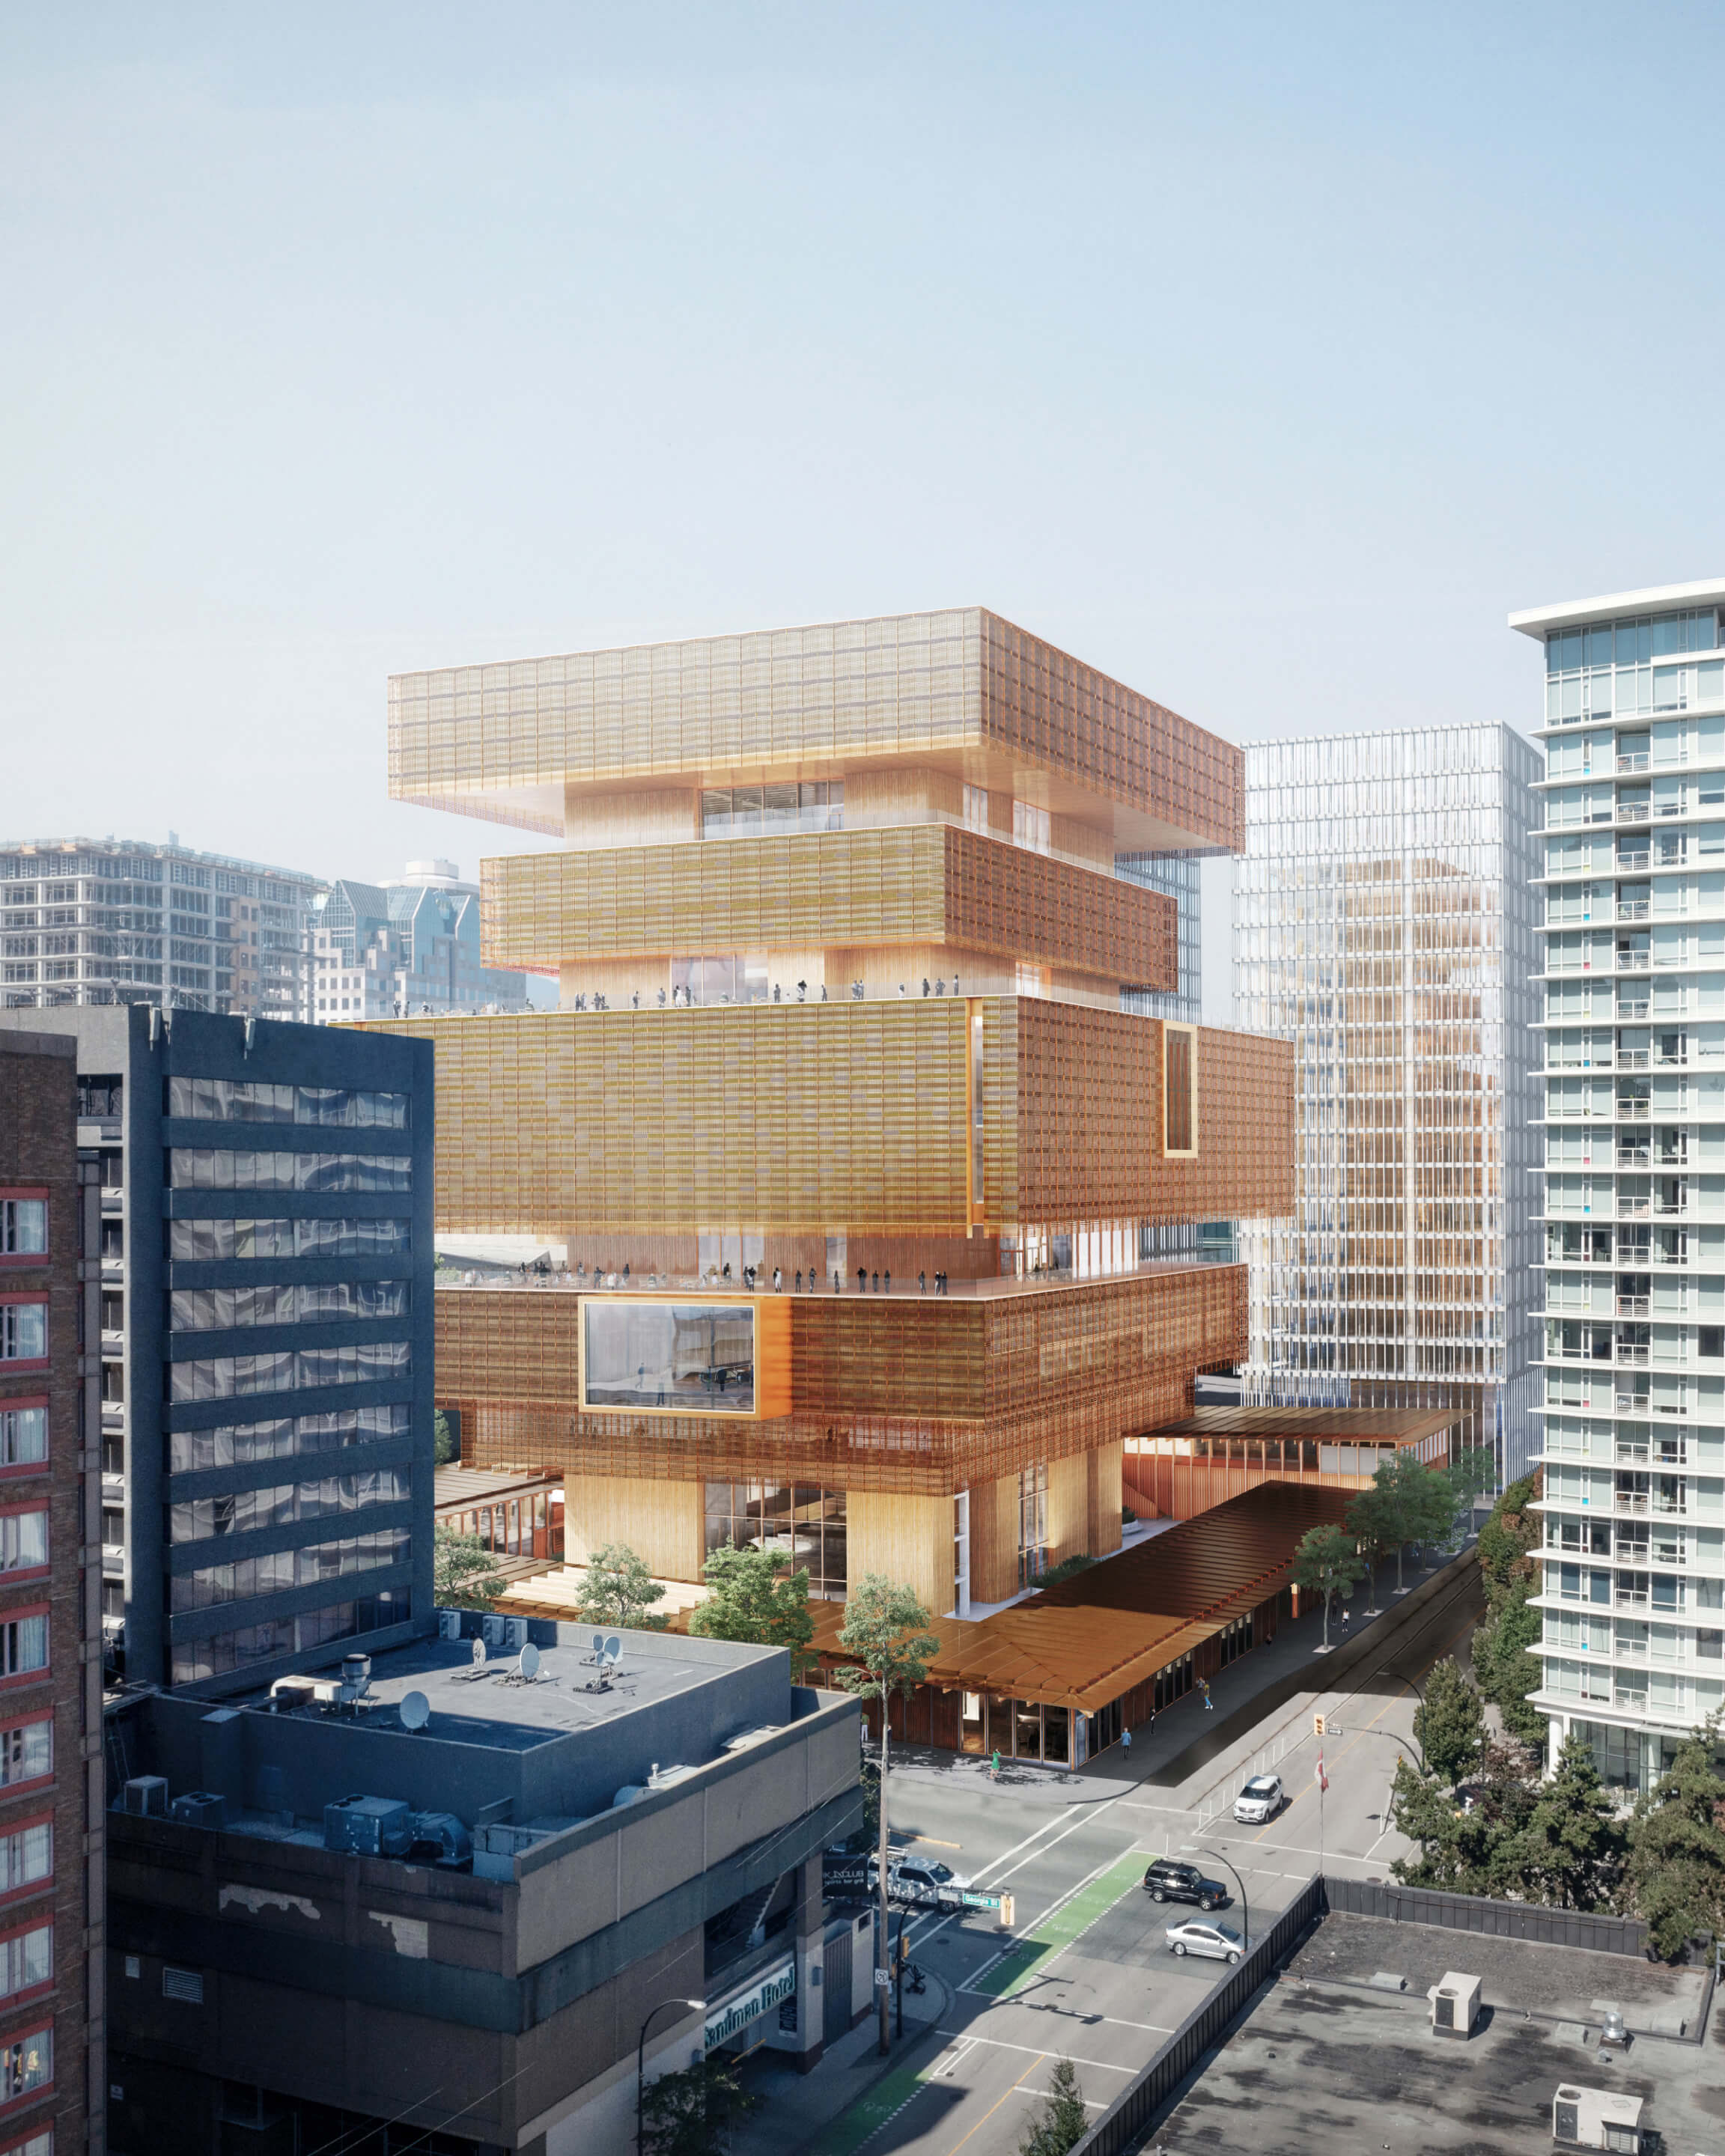 rendering of a stacked museum building with a basket-weave facade